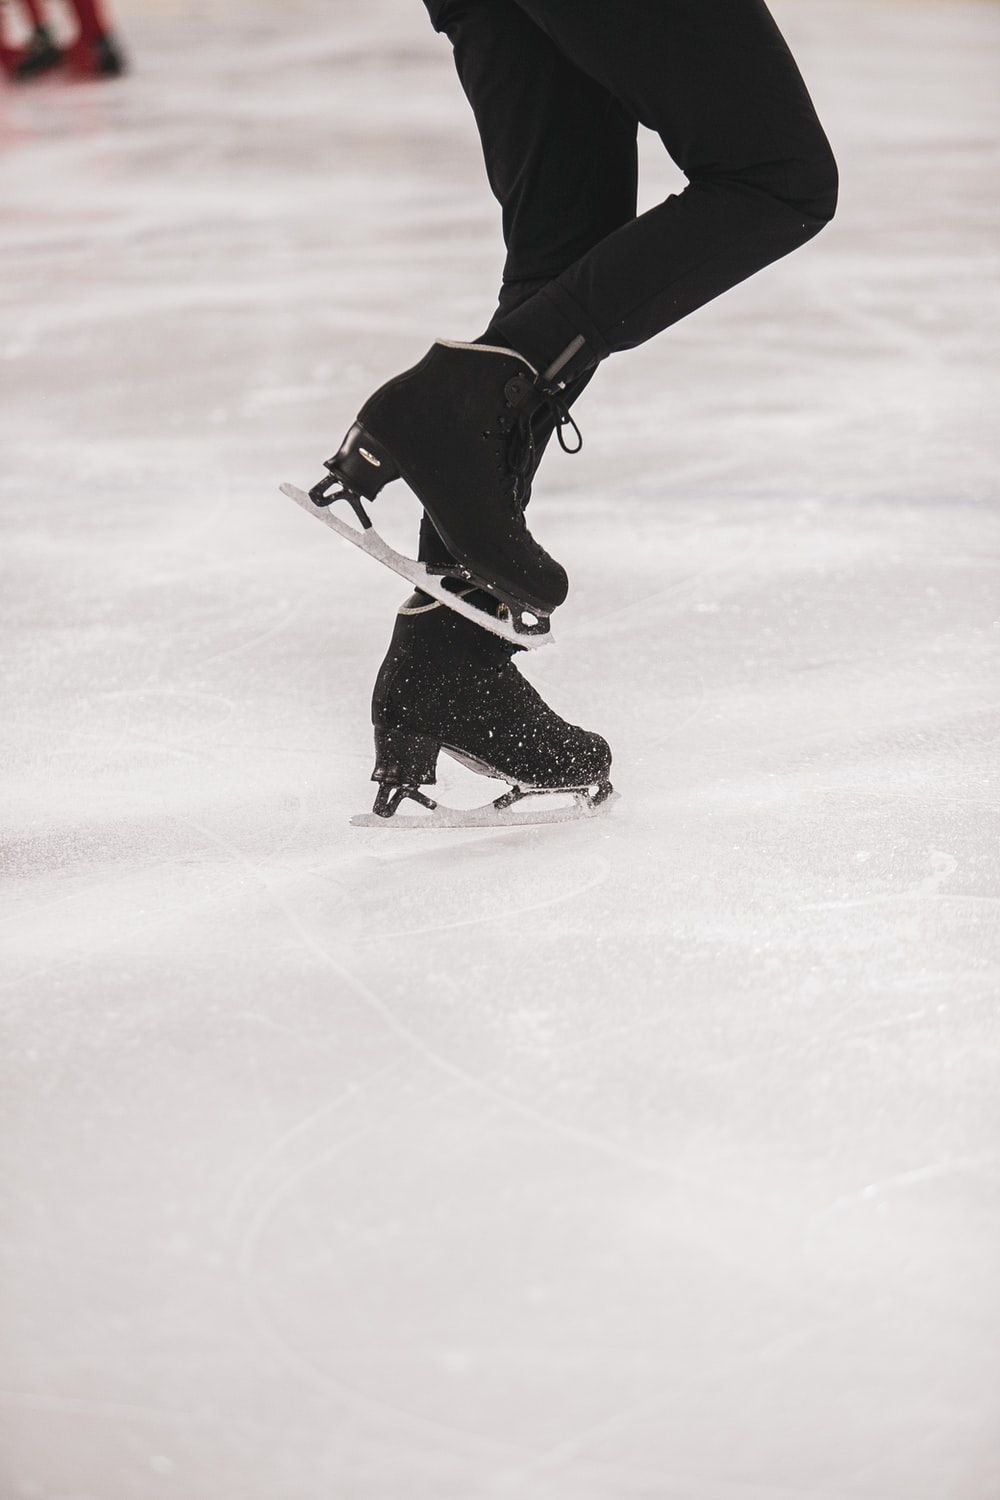 Ice Skating Picture. Download Free Image